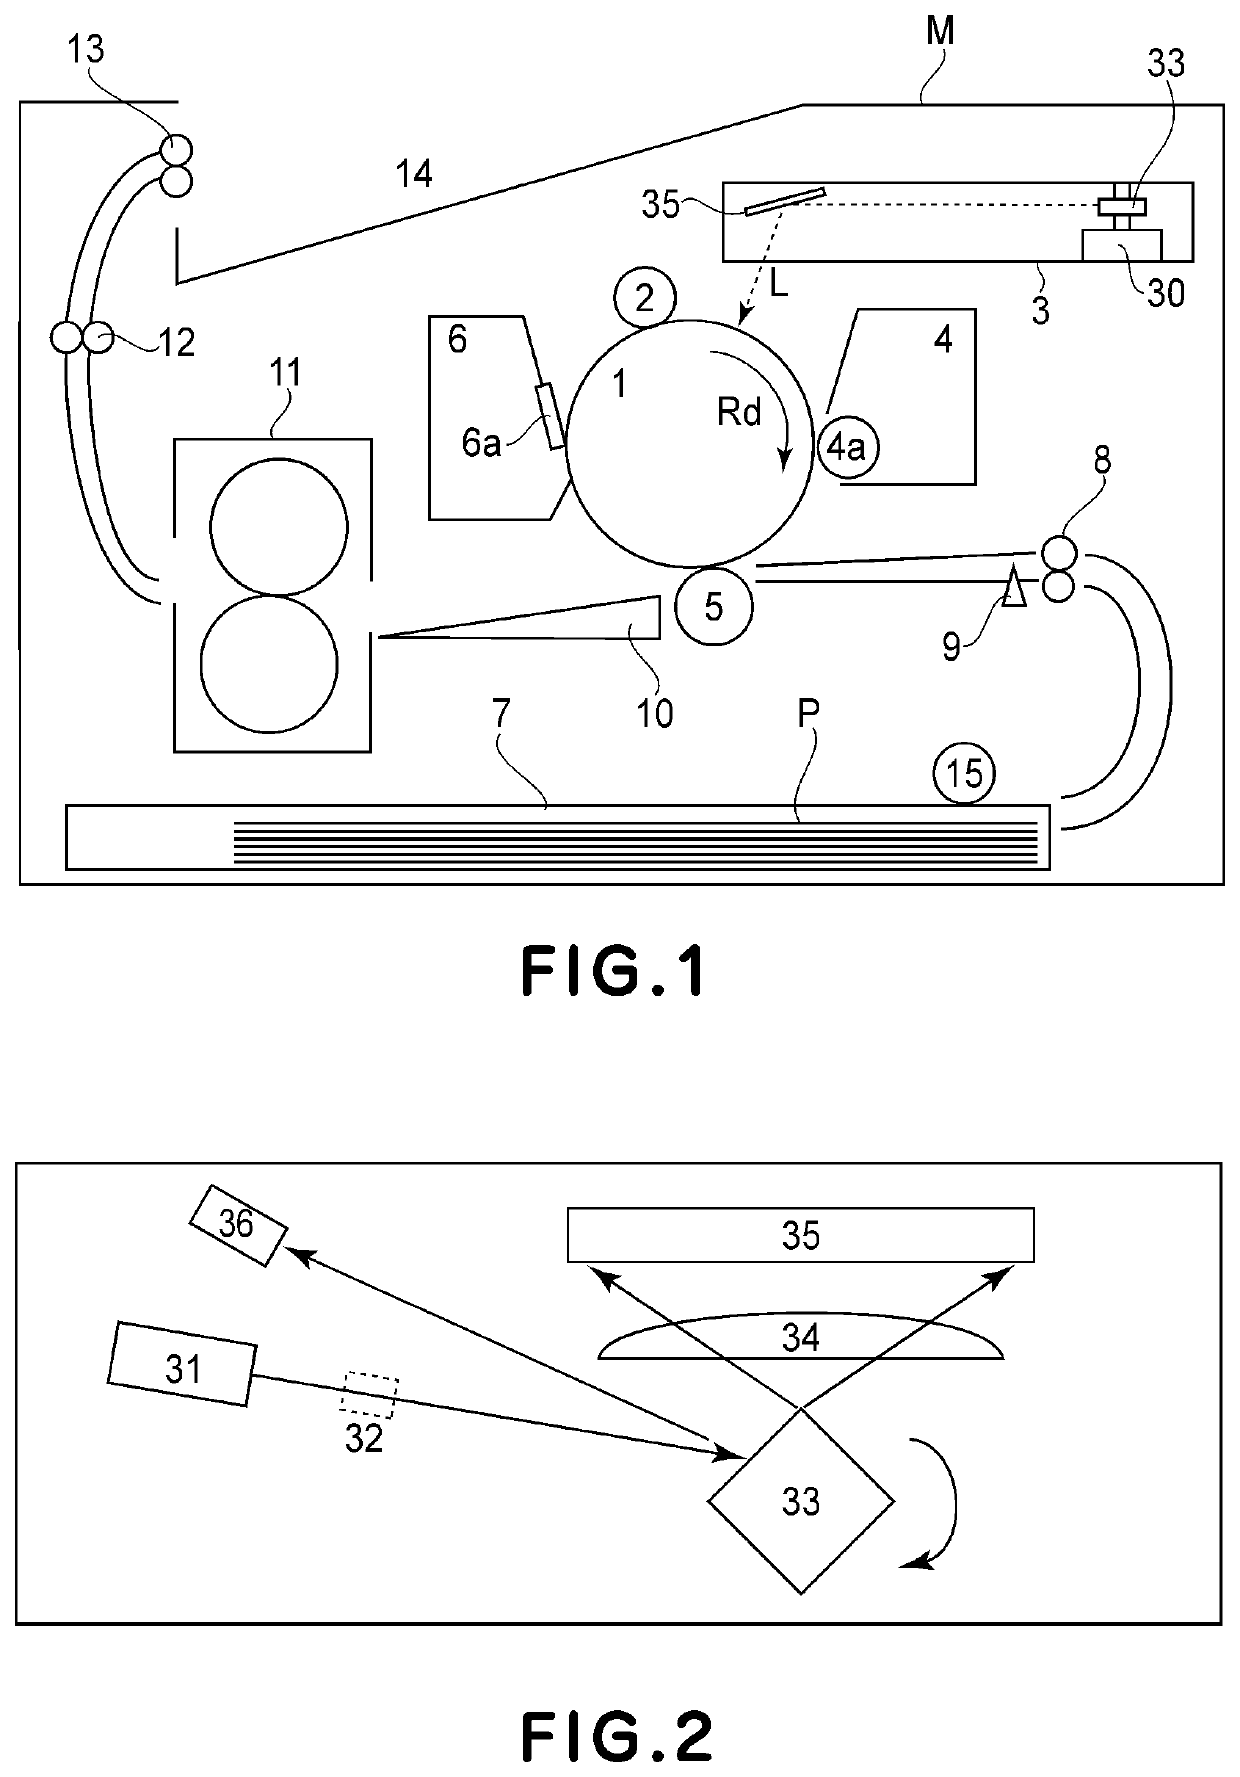 Image forming apparatus configured to set a start of a feeding operation based on a value related to a rate of temperature rise for a fixing portion